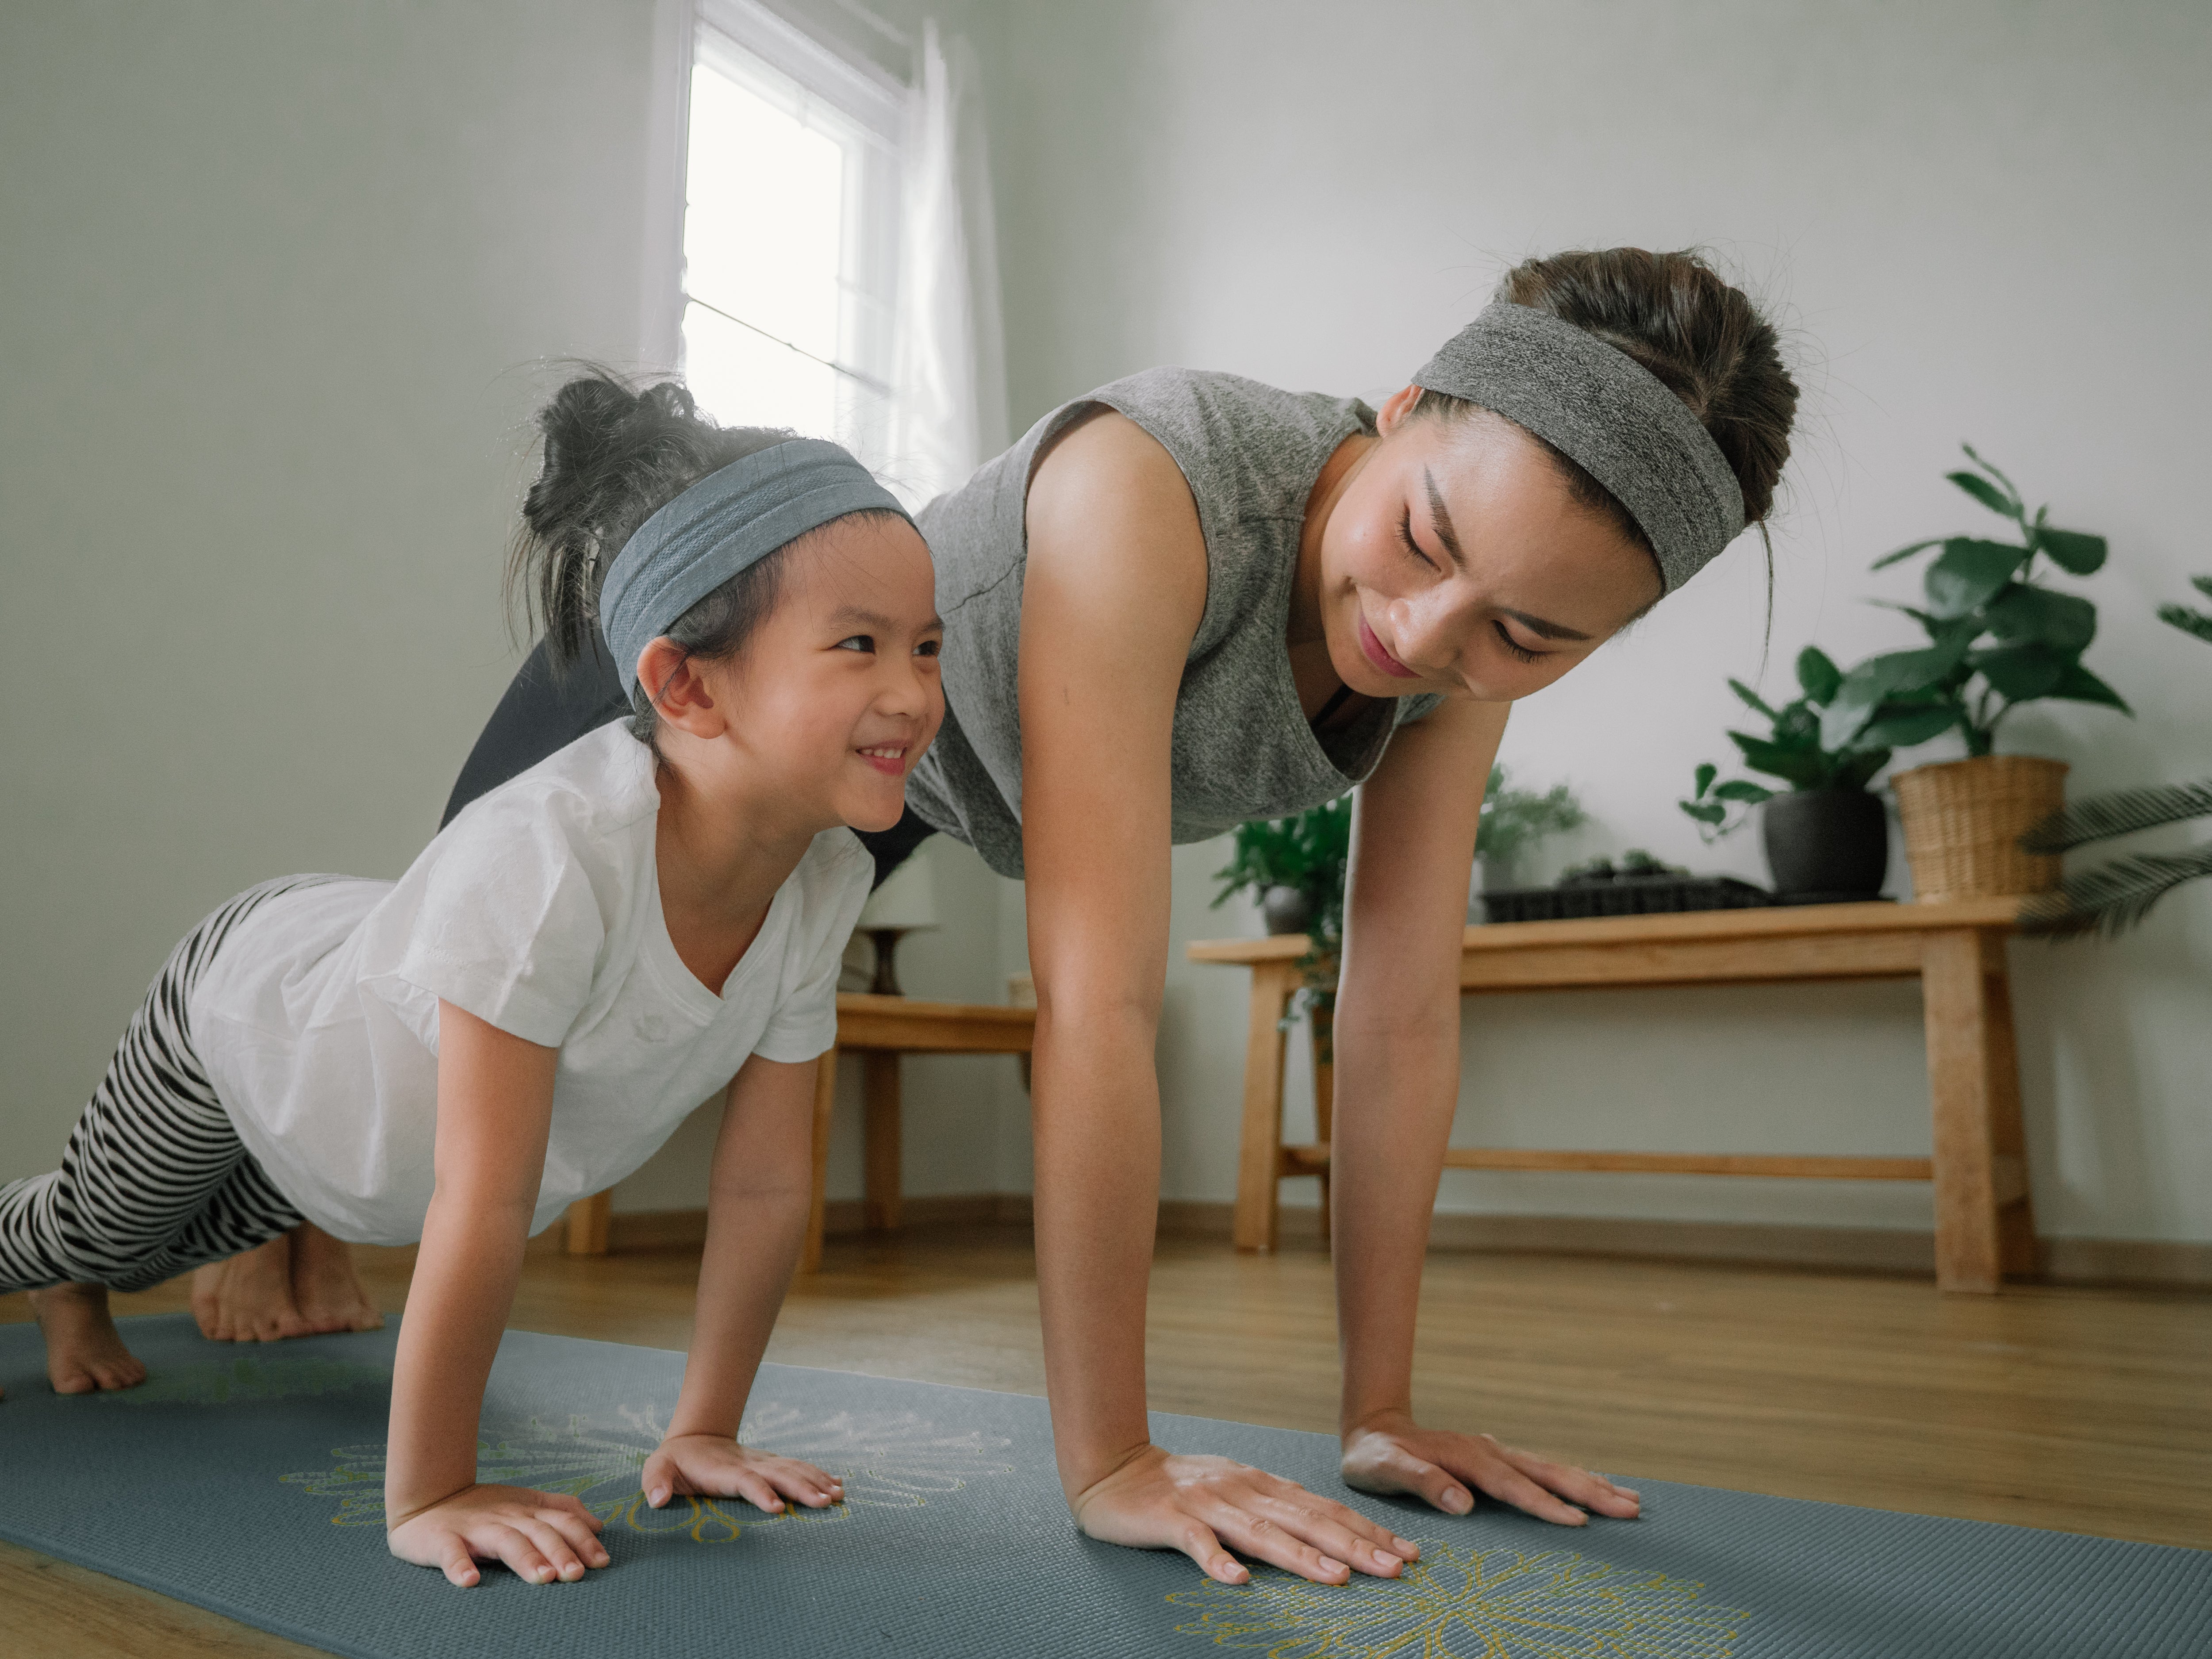 Mom and daughter doing yoga together